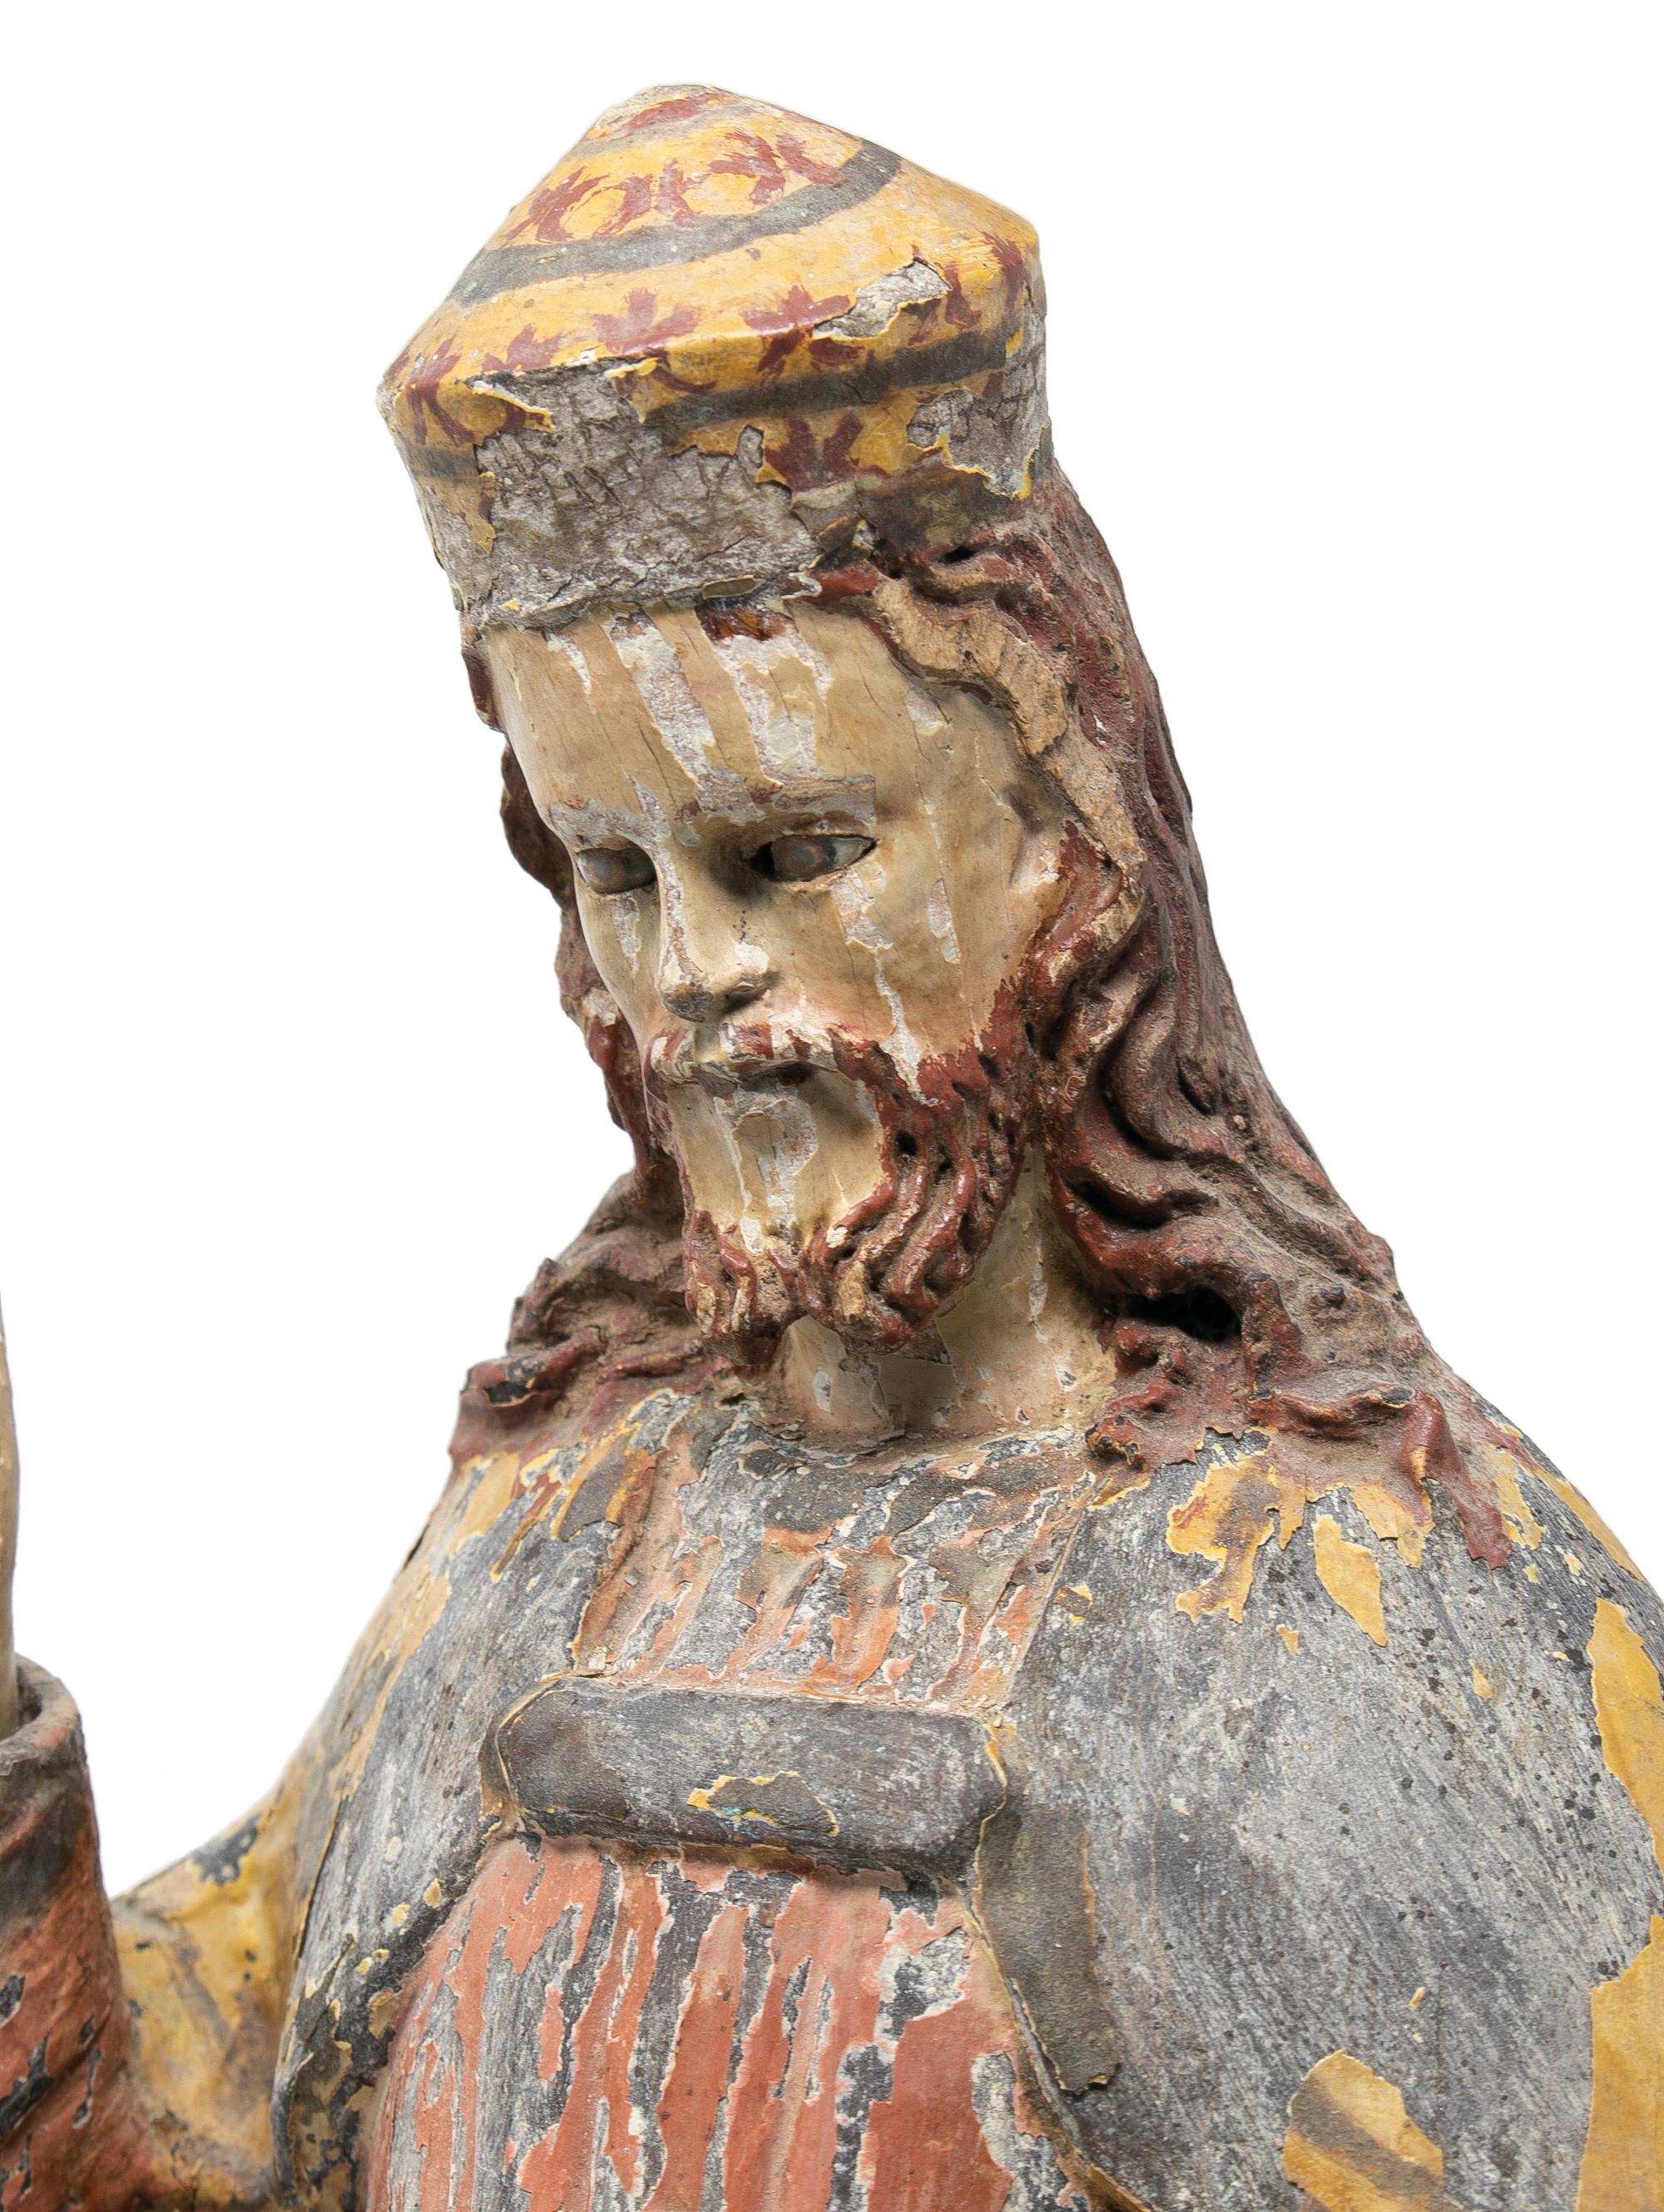 Mid-19th Century Spanish Saint Painted Wooden Figurative Sculpture For Sale 5